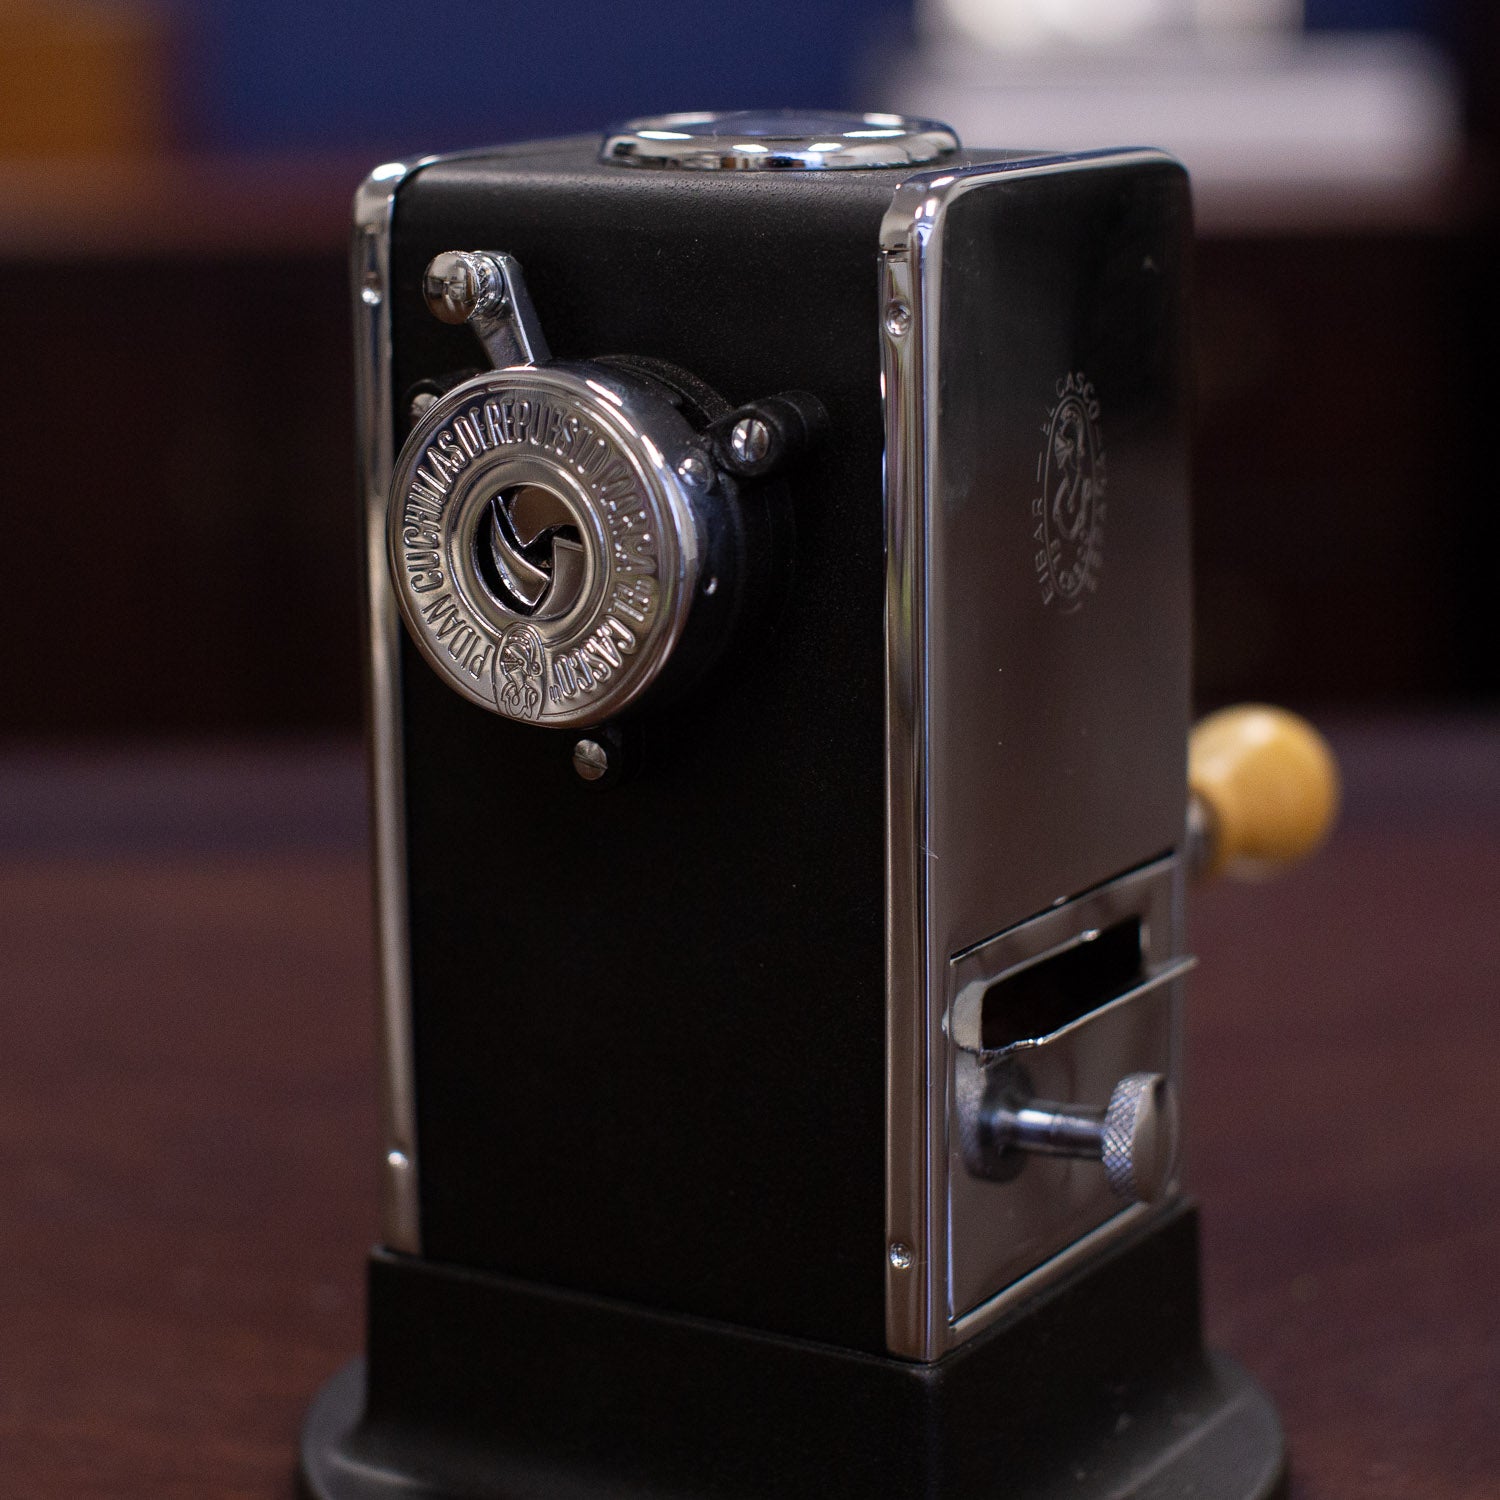 A small El Casco M-430 Pencil Sharpener from KirbyAllison.com on top of a table.